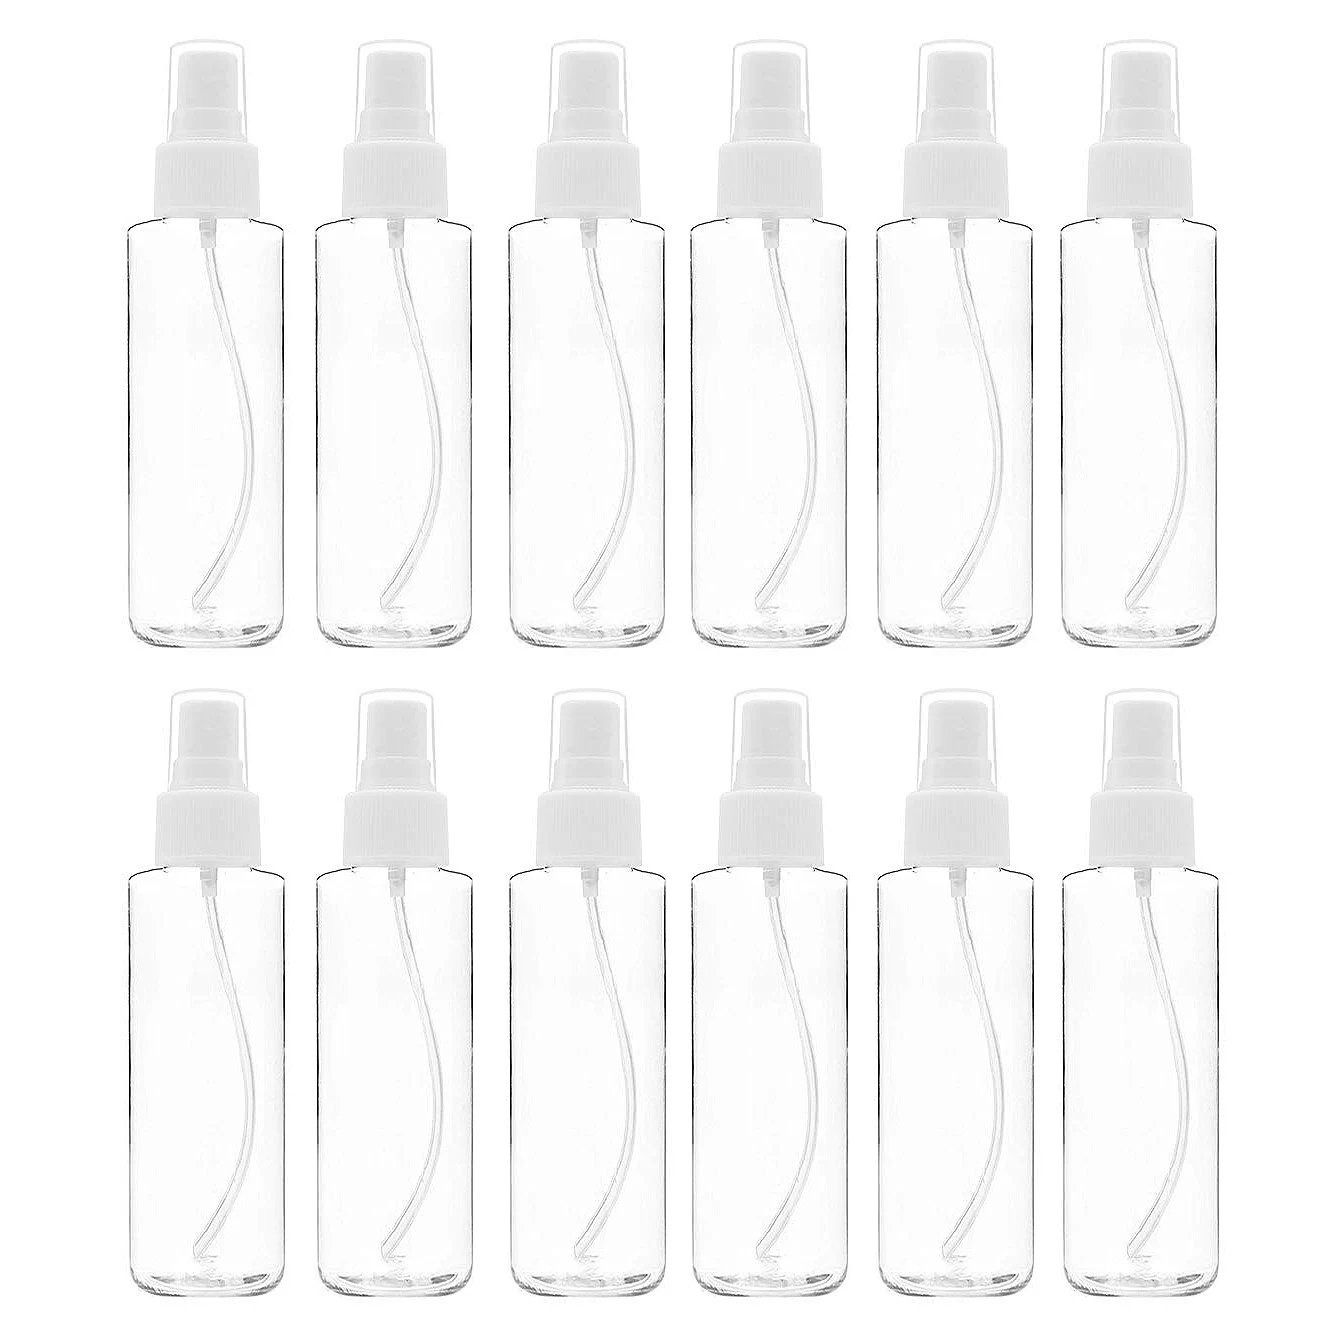 

12 Pack Fine Mist Clear Spray Bottles 120 Ml (4 Oz) with Pump Spray Cap, Reusable and Refillable Small Empty Plastic Bottles